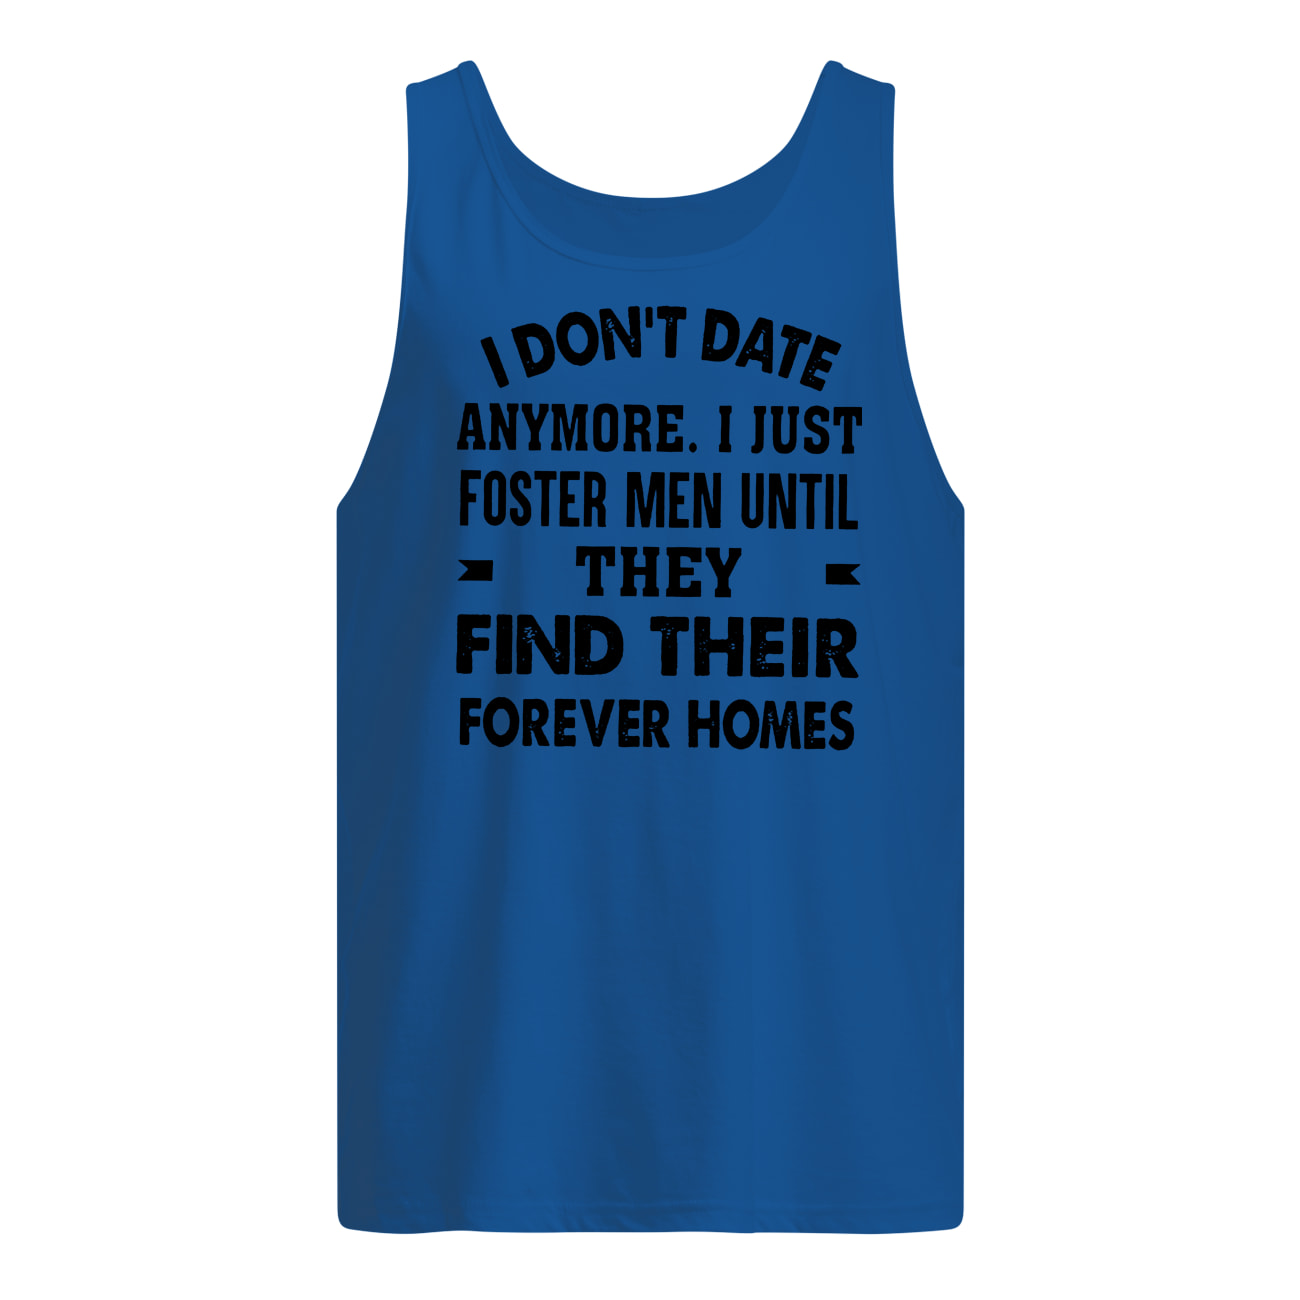 I don't date anymore I just foster men until they find their forever homes tank top